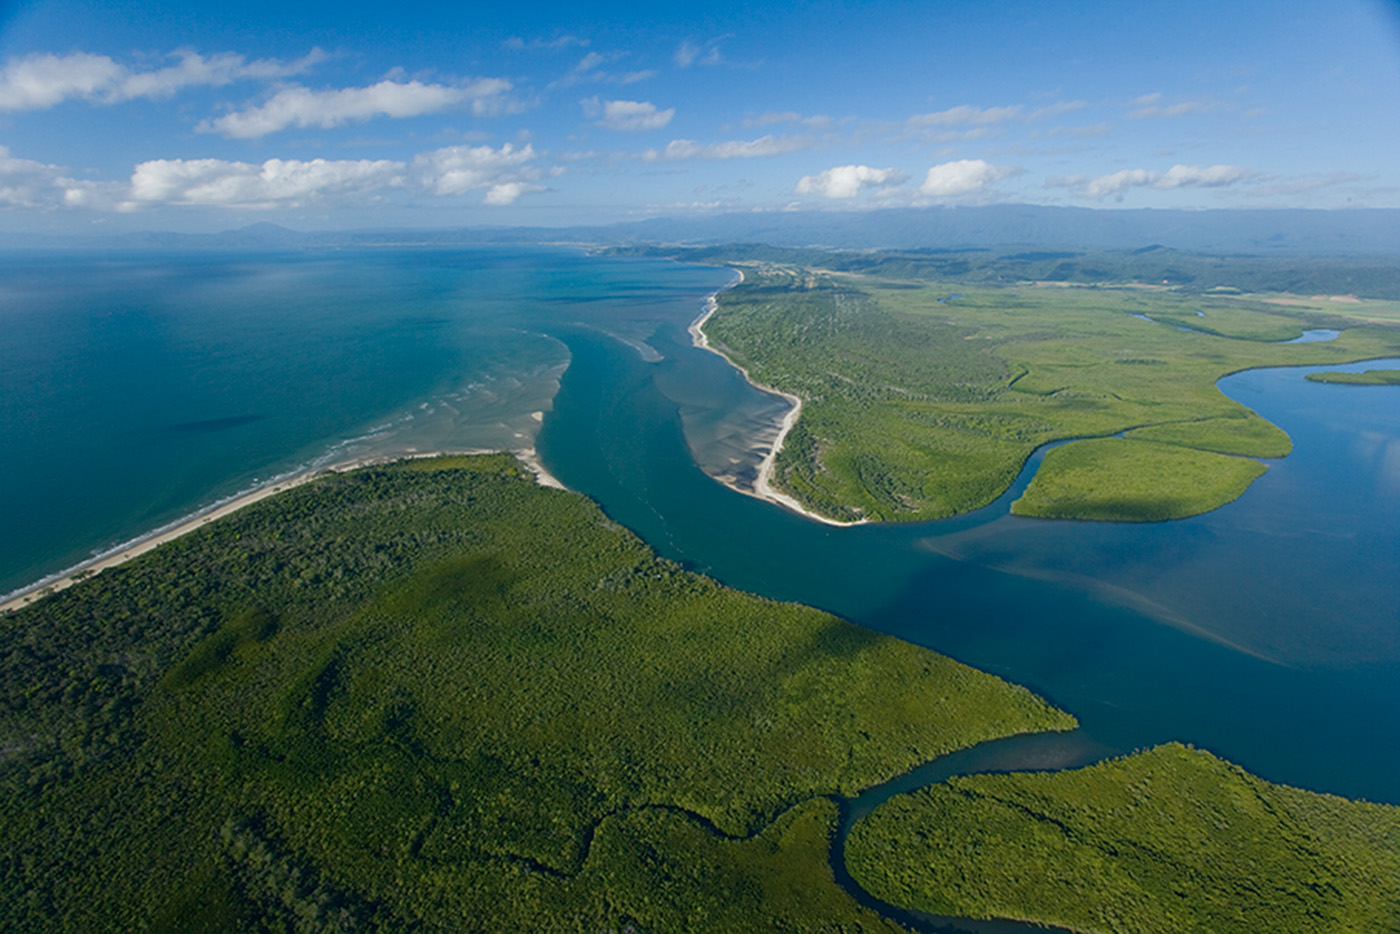 Aerial photo of the mouth of the Daintree River